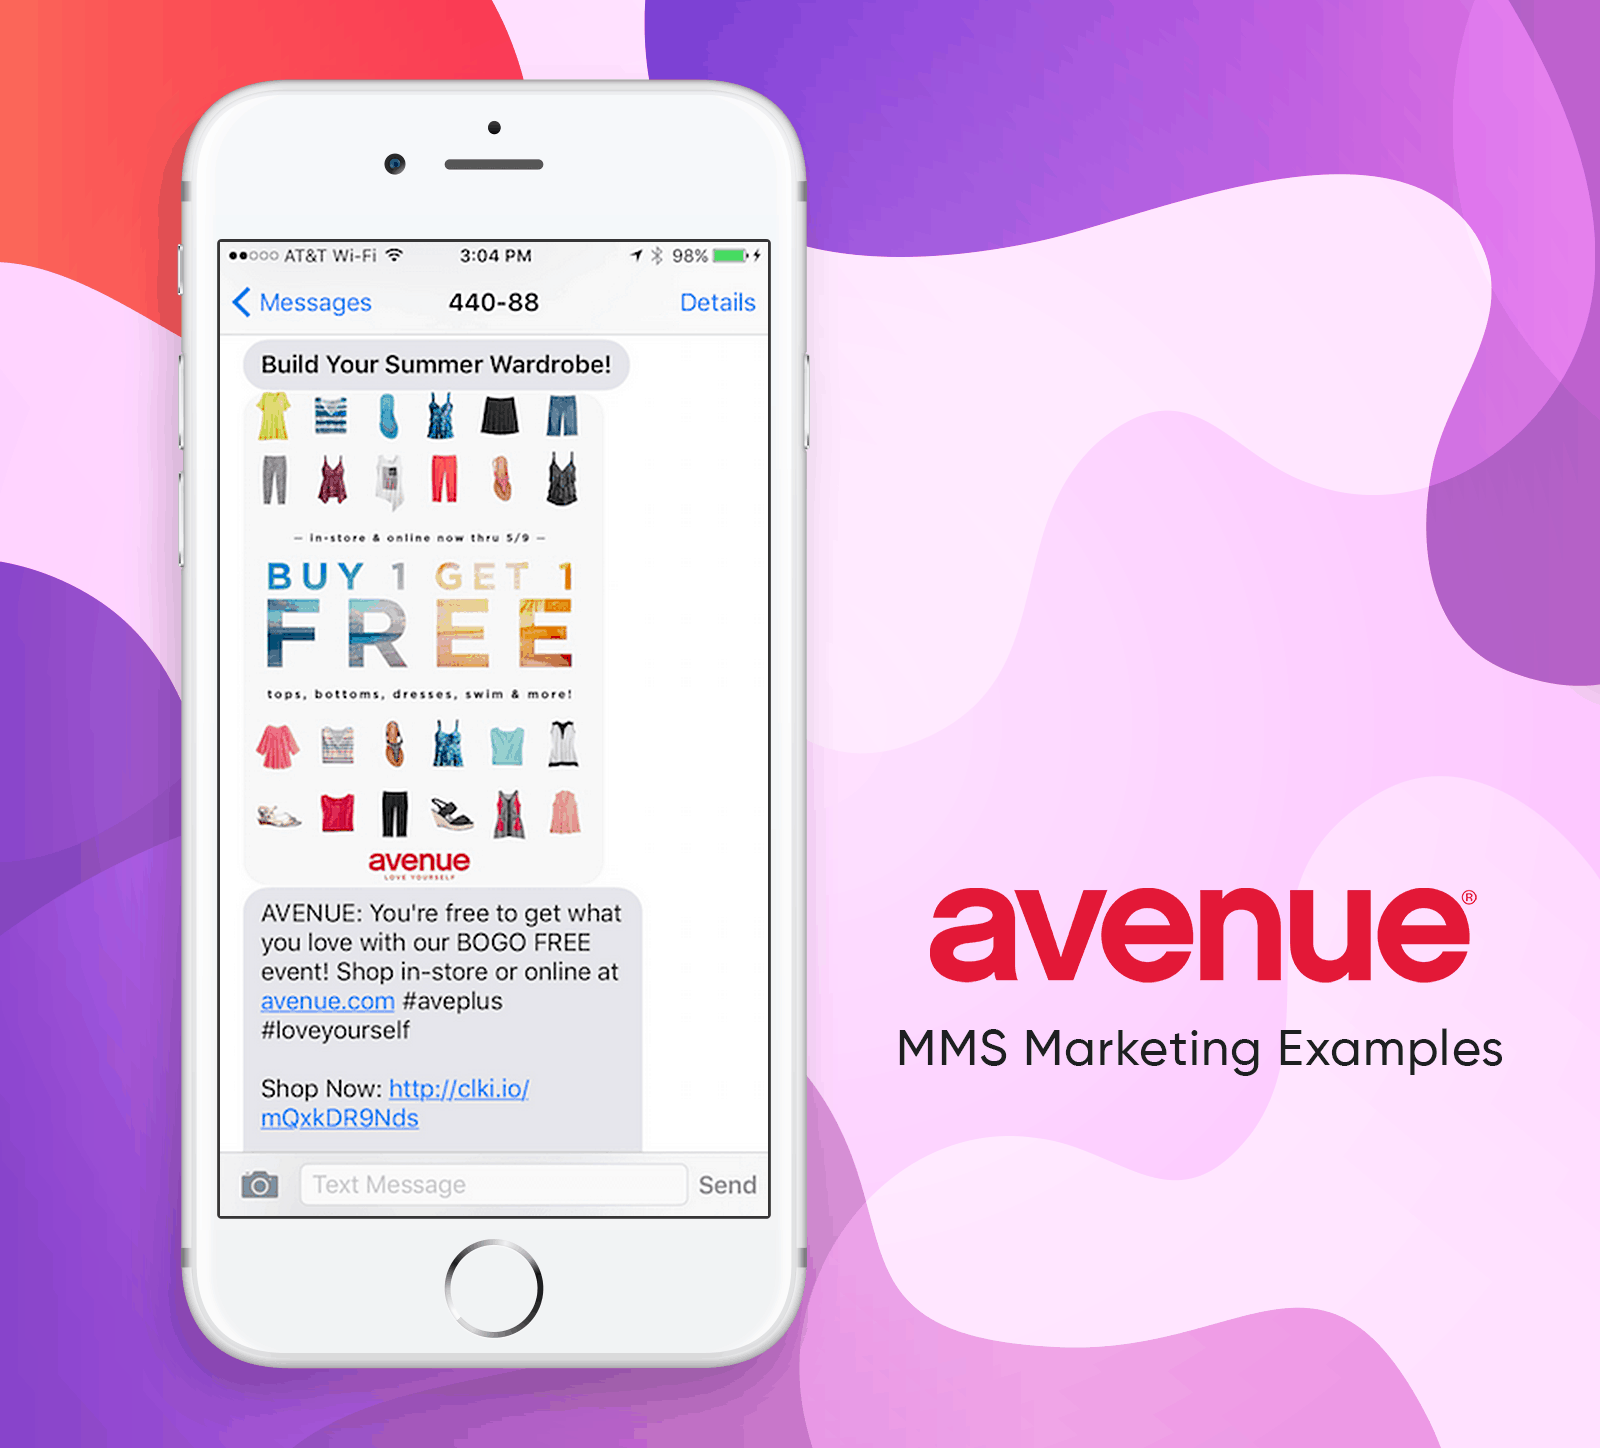 MMS Marketing Examples From Avenue Retail Stores - Build Your Summer Wardrobe